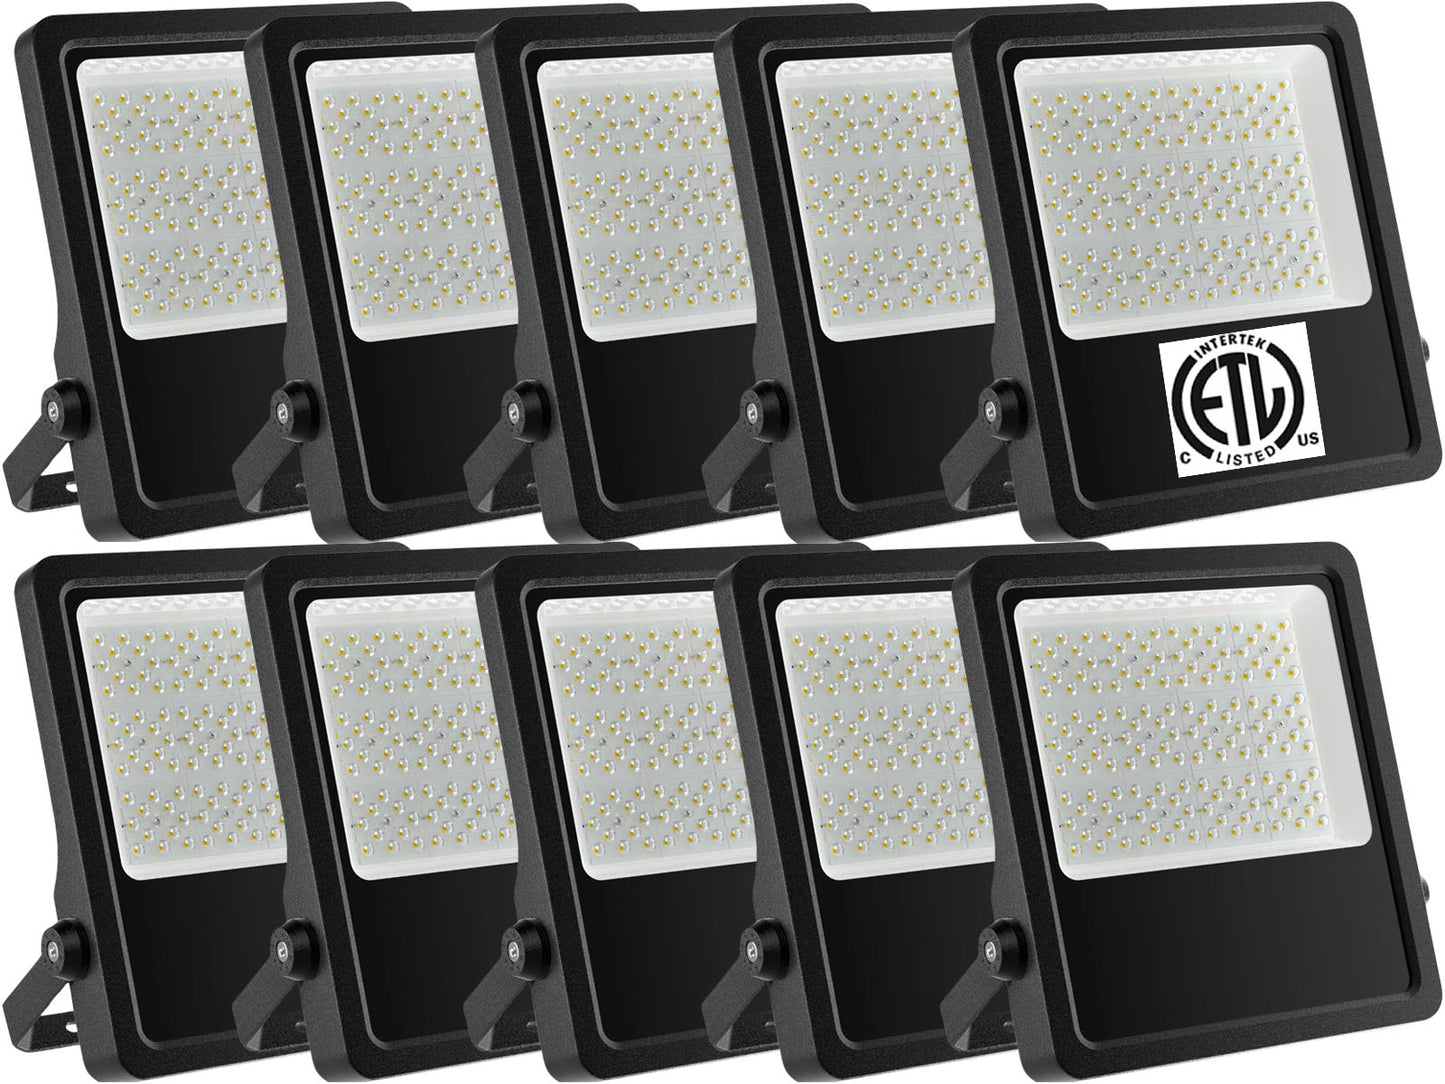 347V 100w Outdoor LED Flood Lights Canada 13000Lm 6500k Bright Photocell